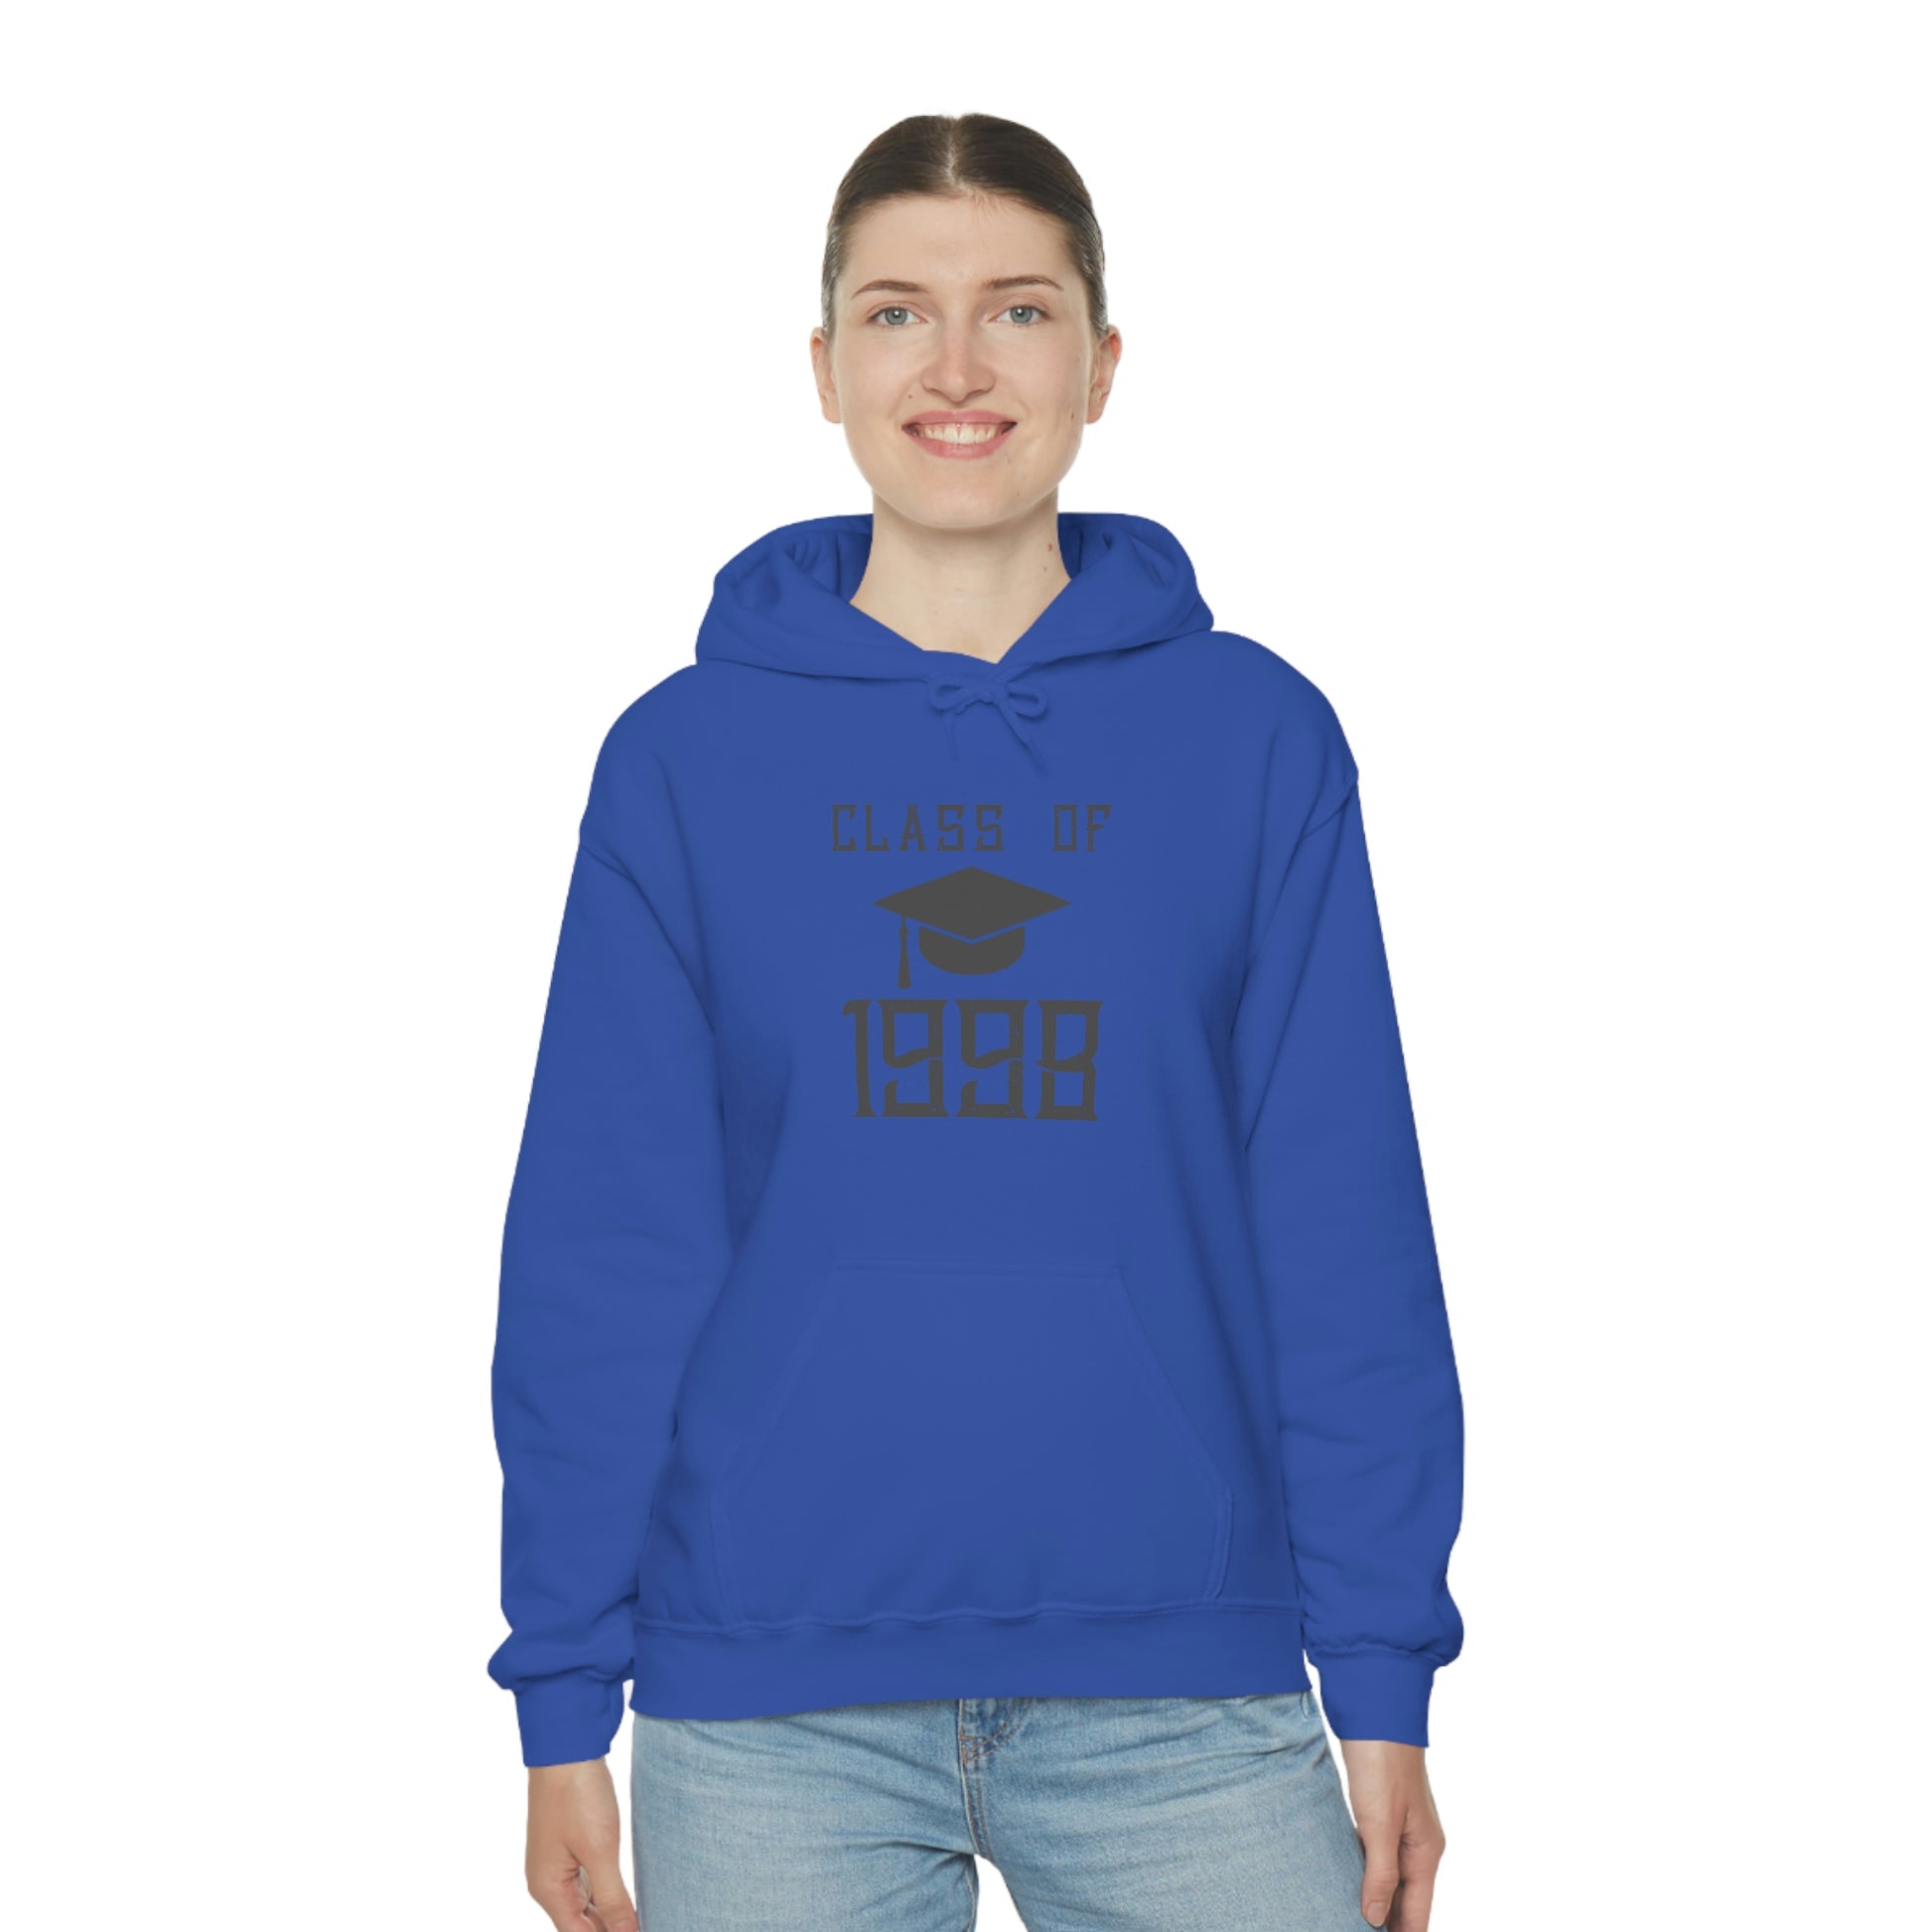 "Class Of 1998" Hoodie - Weave Got Gifts - Unique Gifts You Won’t Find Anywhere Else!